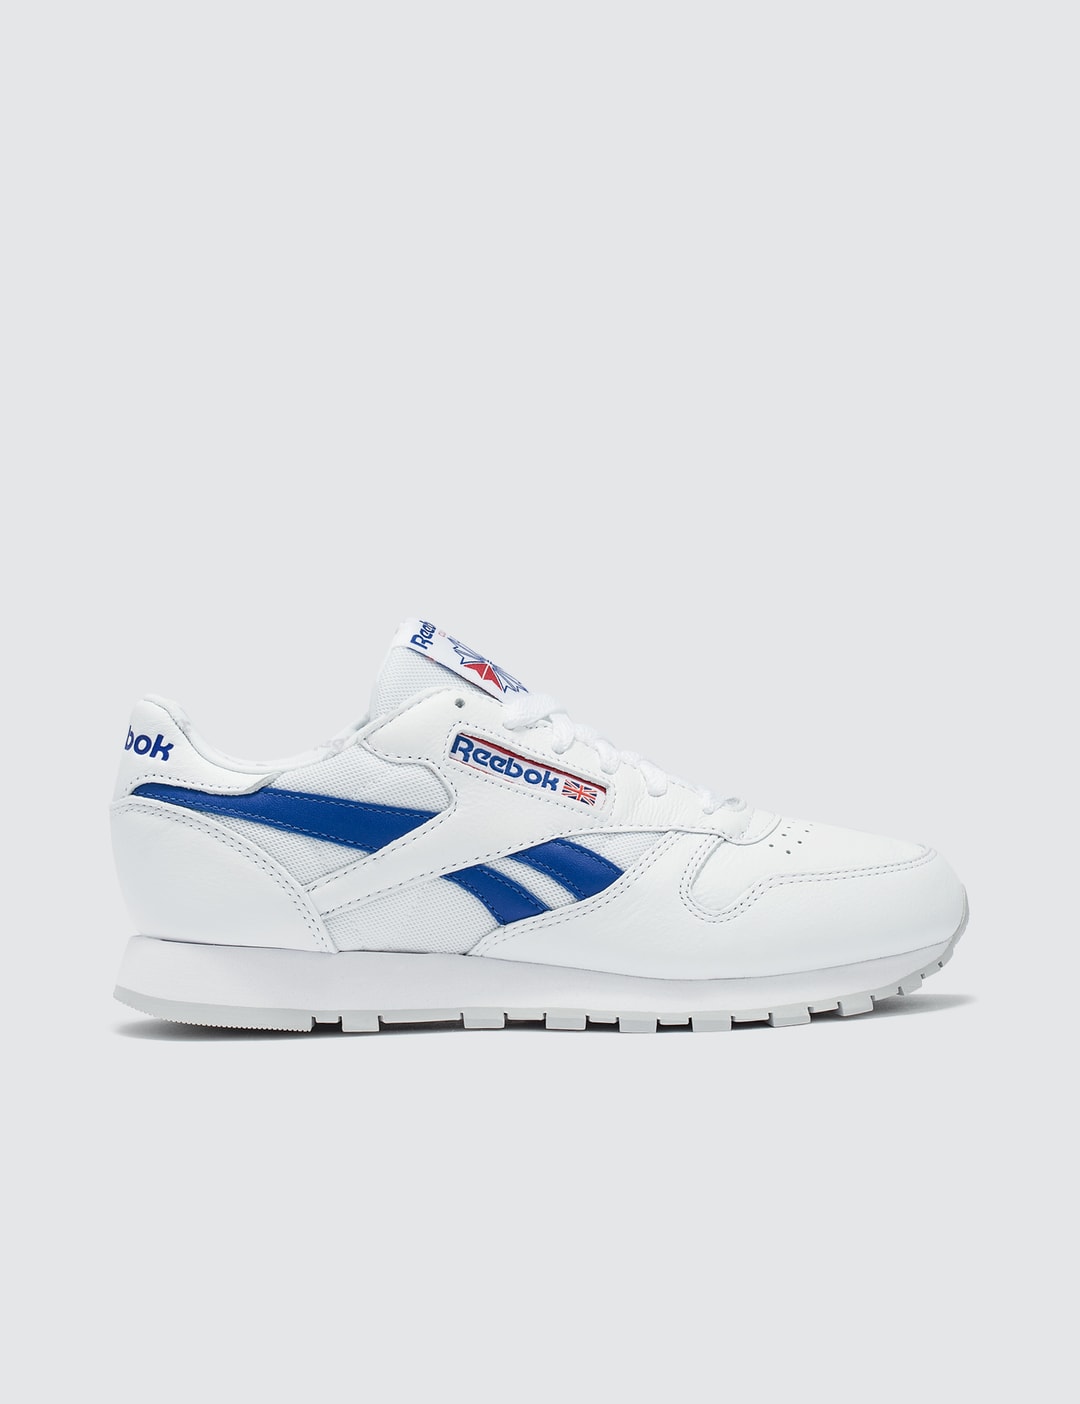 Reebok - Cl Leather SO | HBX - Globally Curated Fashion and Lifestyle ...